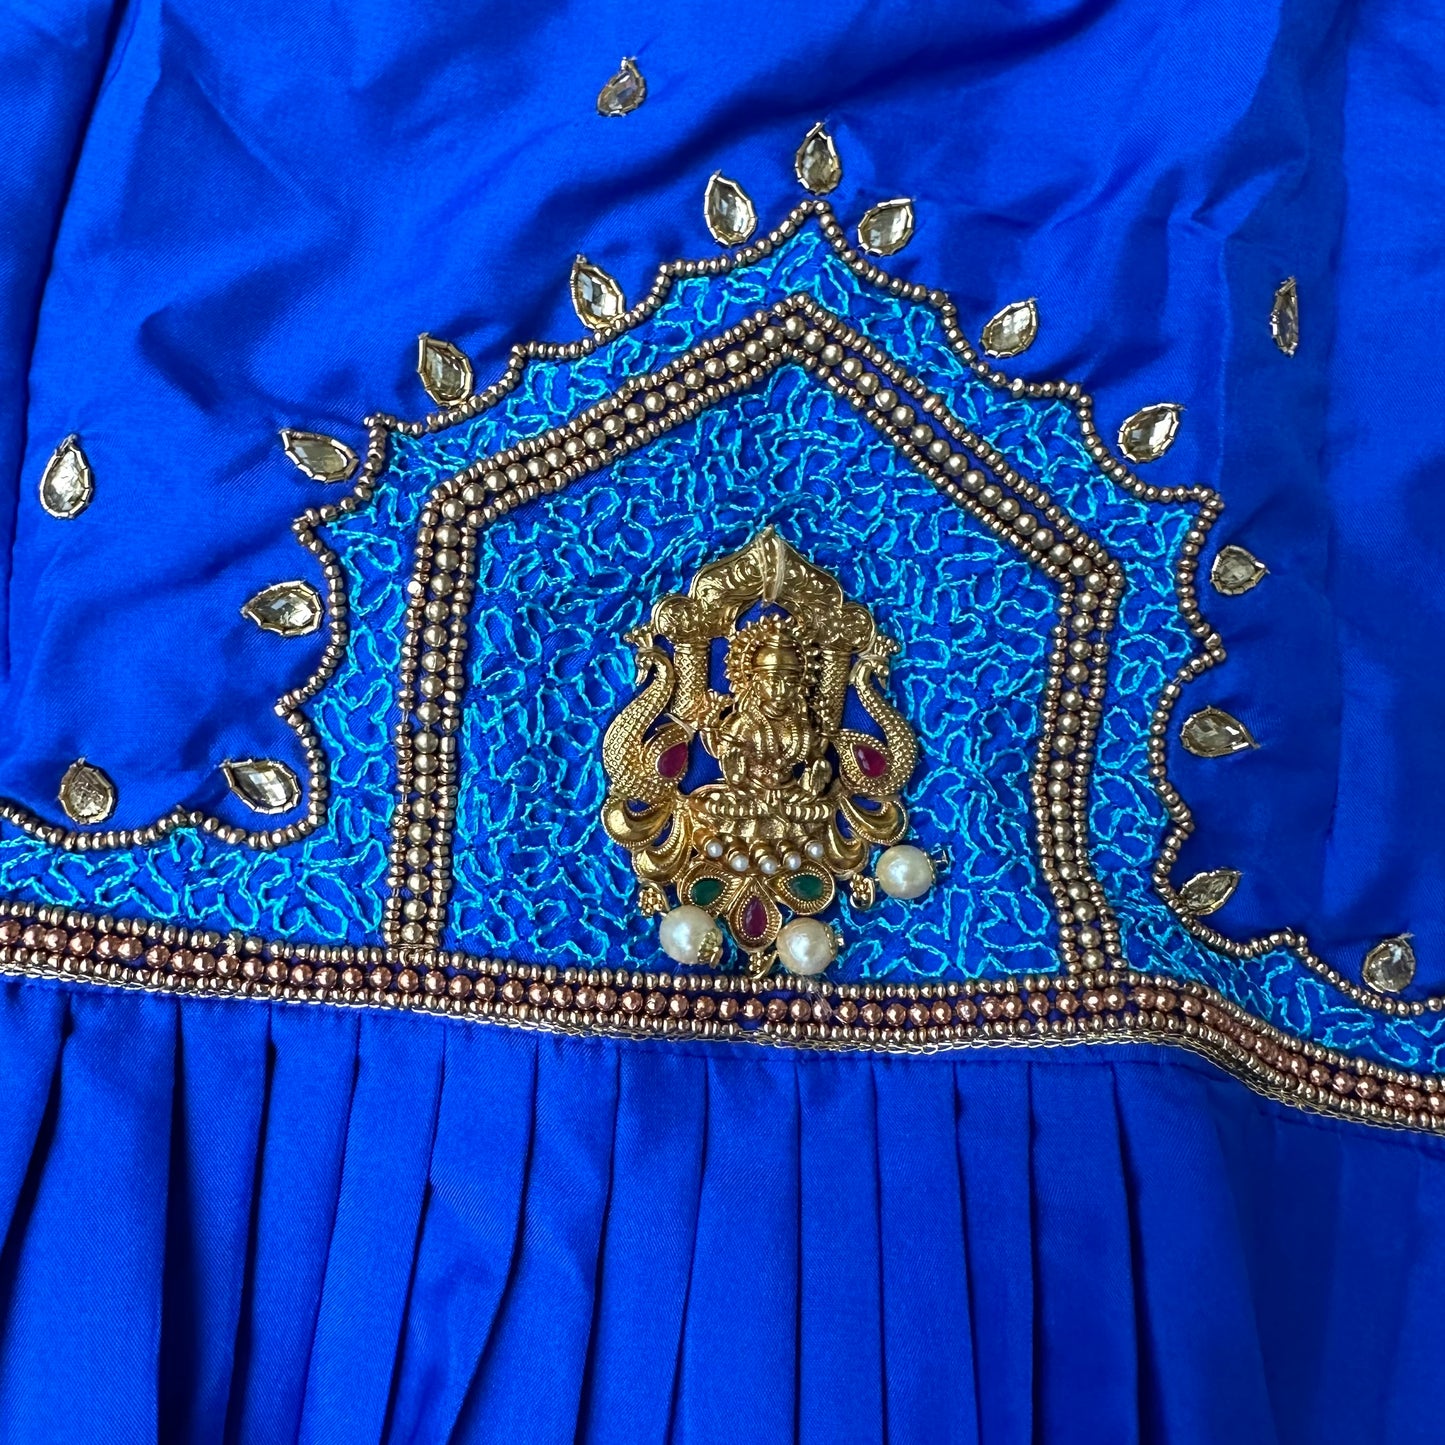 Little Royalty: Royal Blue Top with Copper Zari Skirt